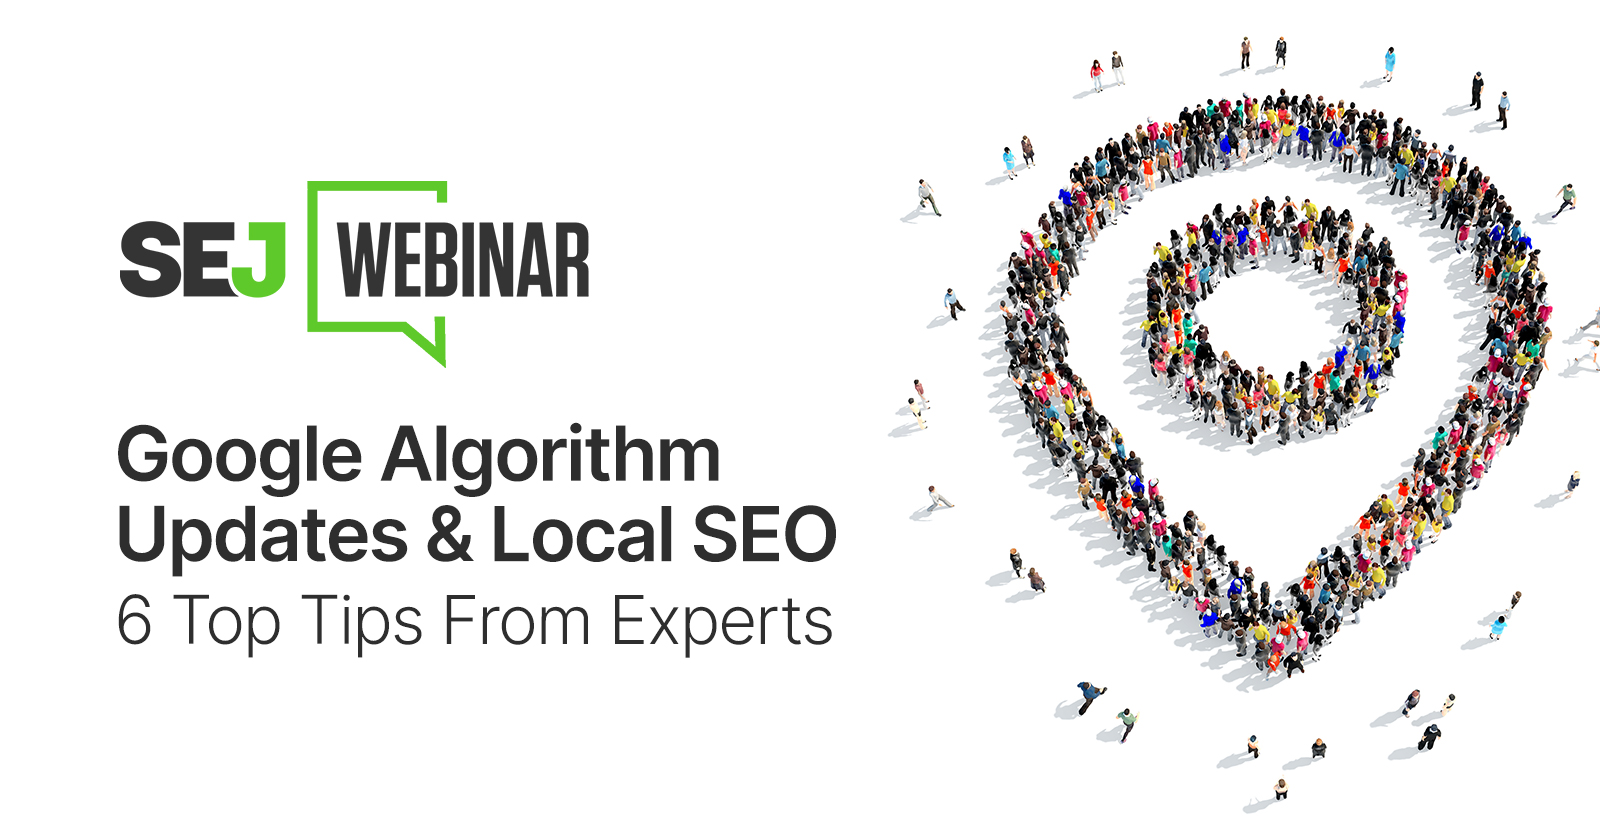 Google Algorithm Updates & Local SEO: 6 Top Tips From Experts via @sejournal, @hethr_campbell